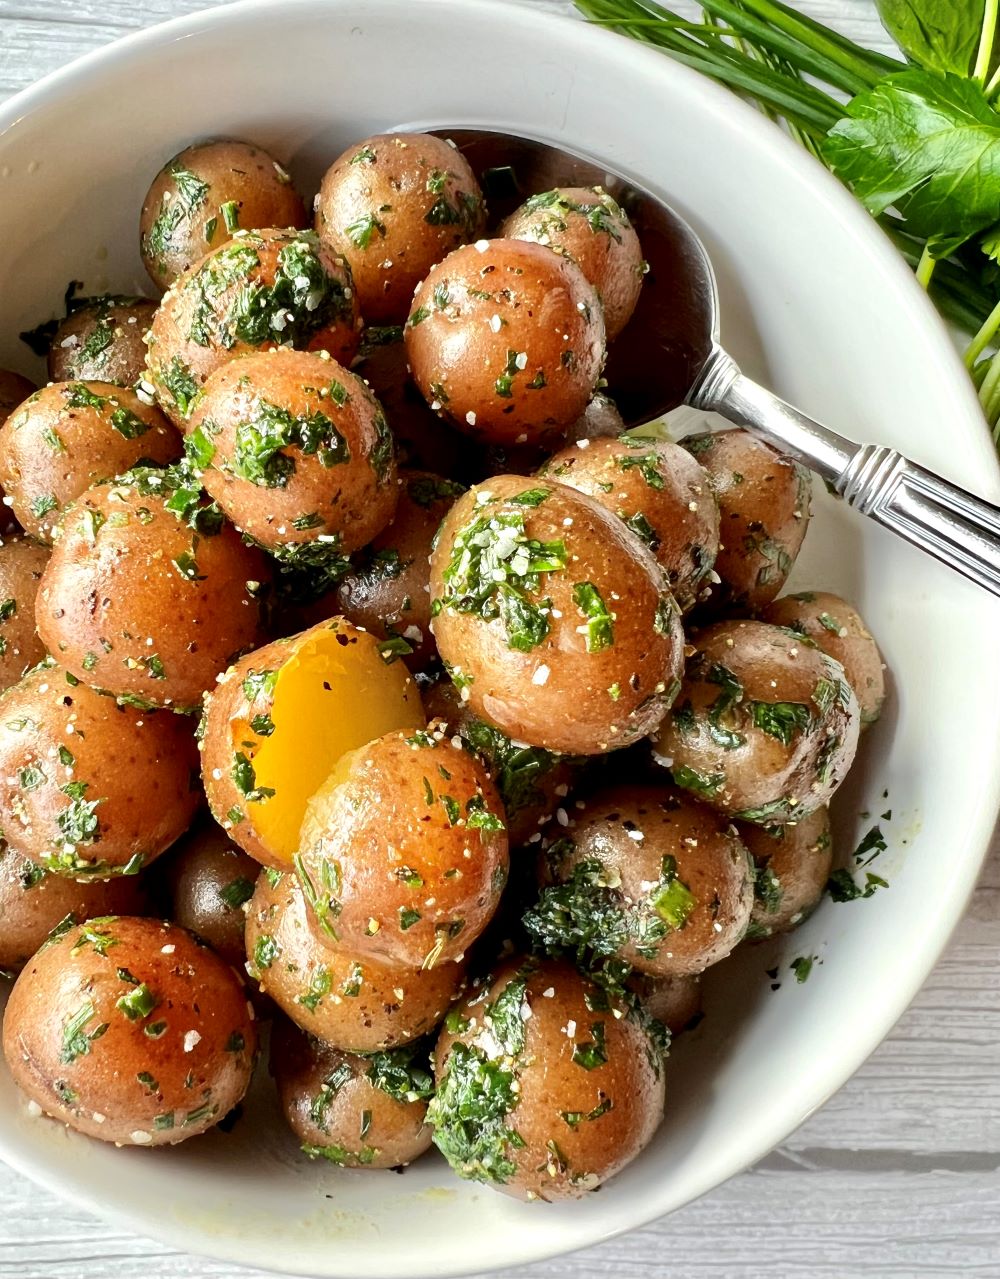 Boiled Baby Potatoes - Vegan and Oil-free Recipes - ZardyPlants